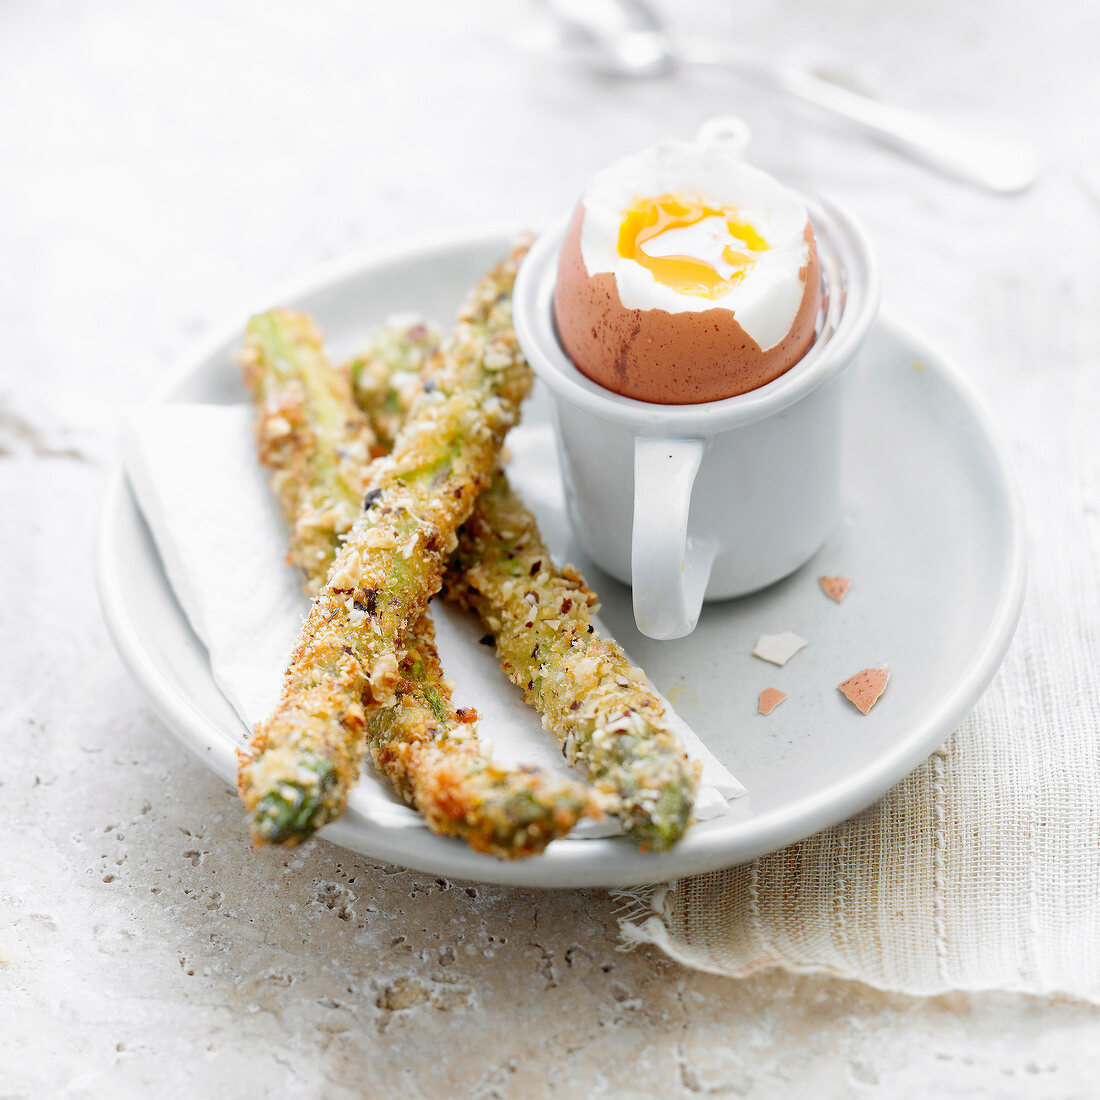 Soft-boiled egg with breaded asparagus